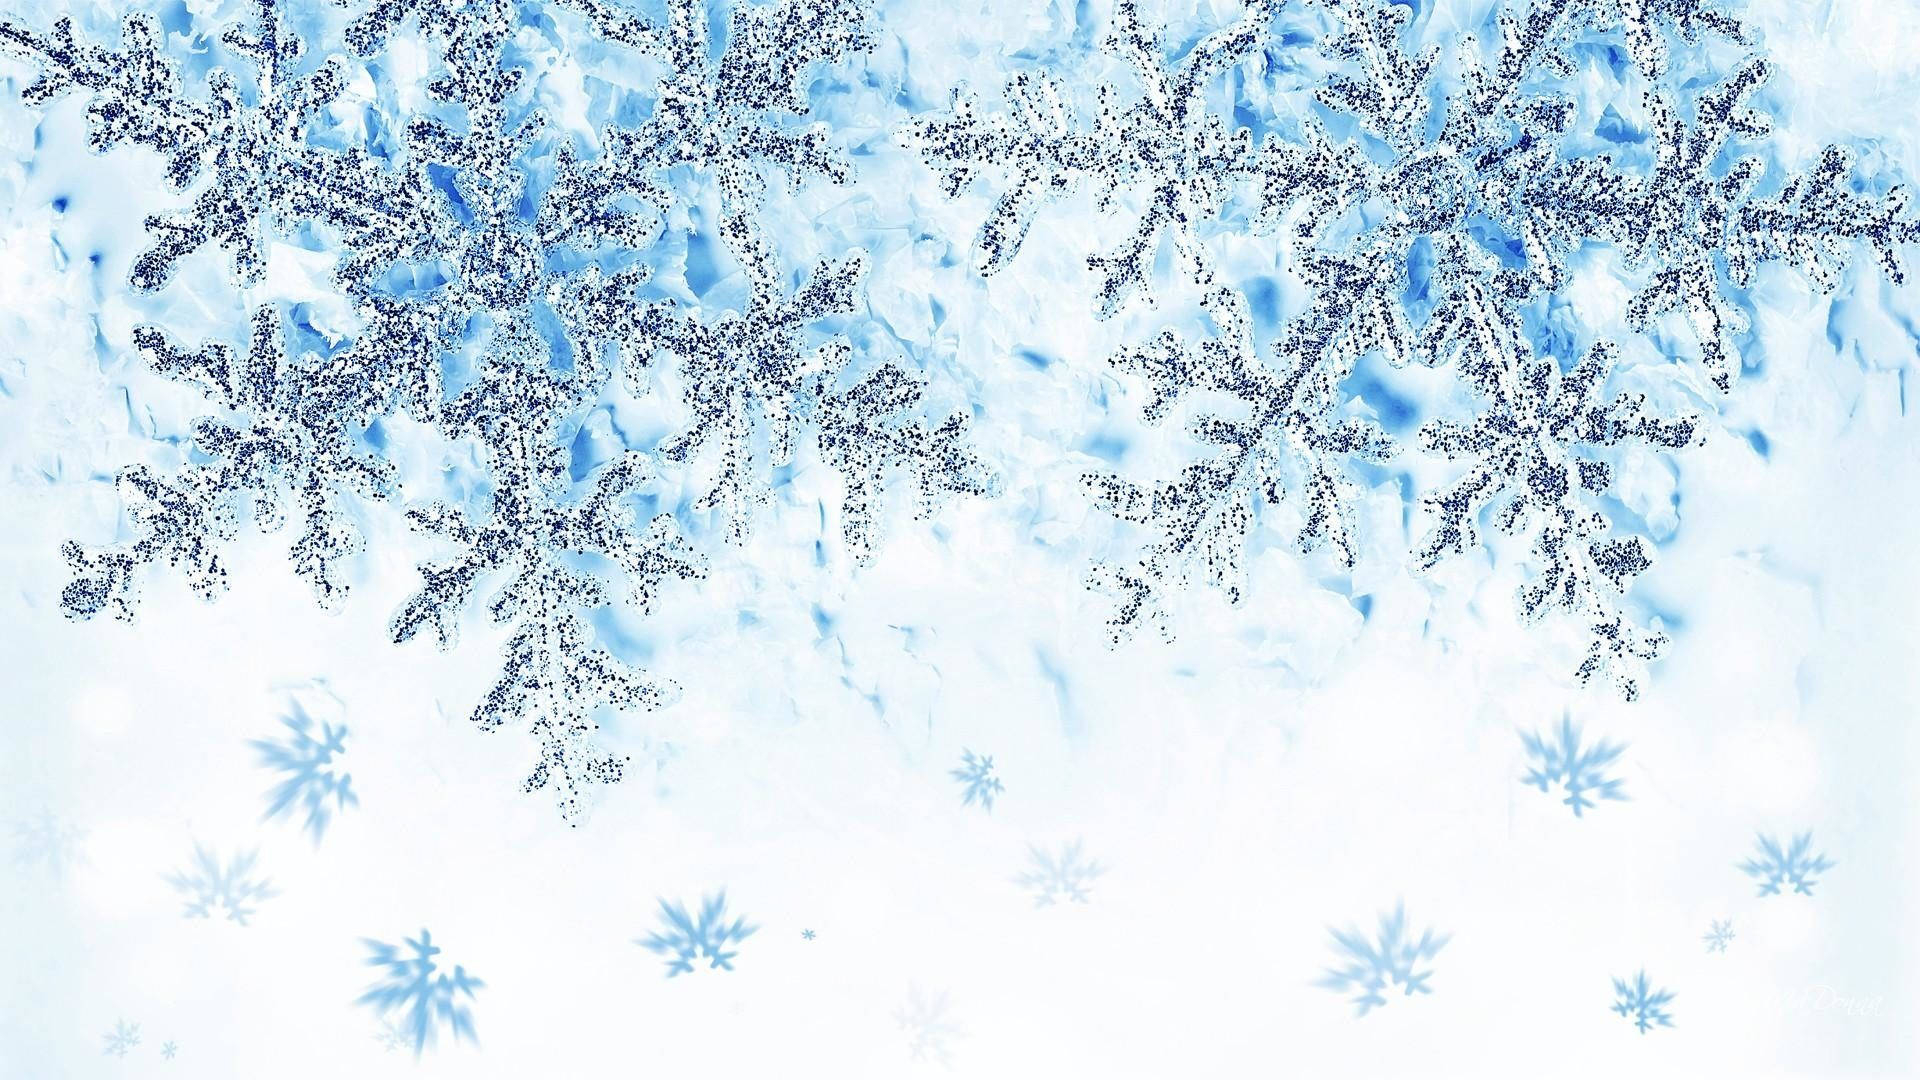 1920x1080 Download Hd Snowflakes In Winter Wallpaper